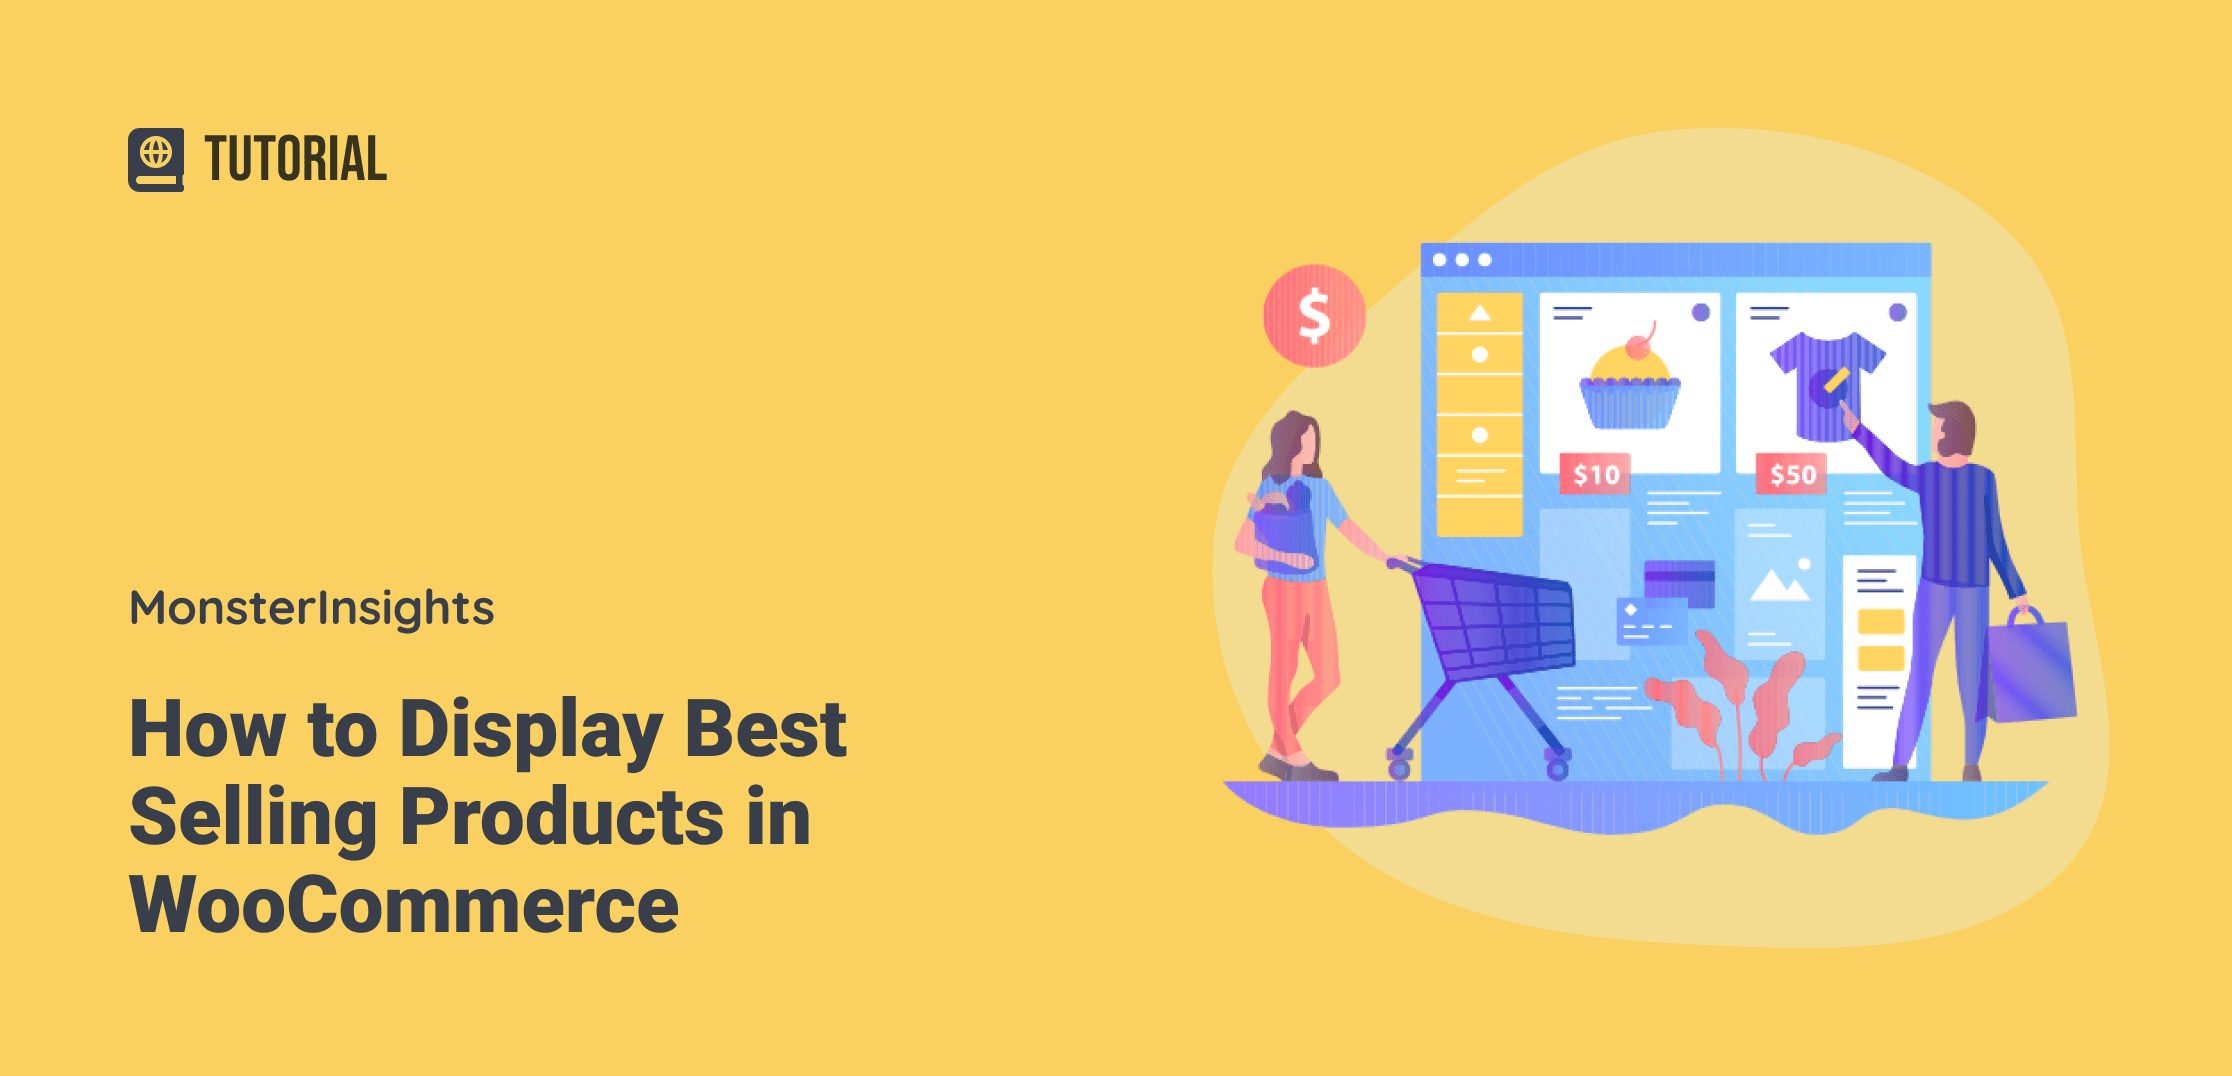 How to Display Best-Selling Products in WooCommerce